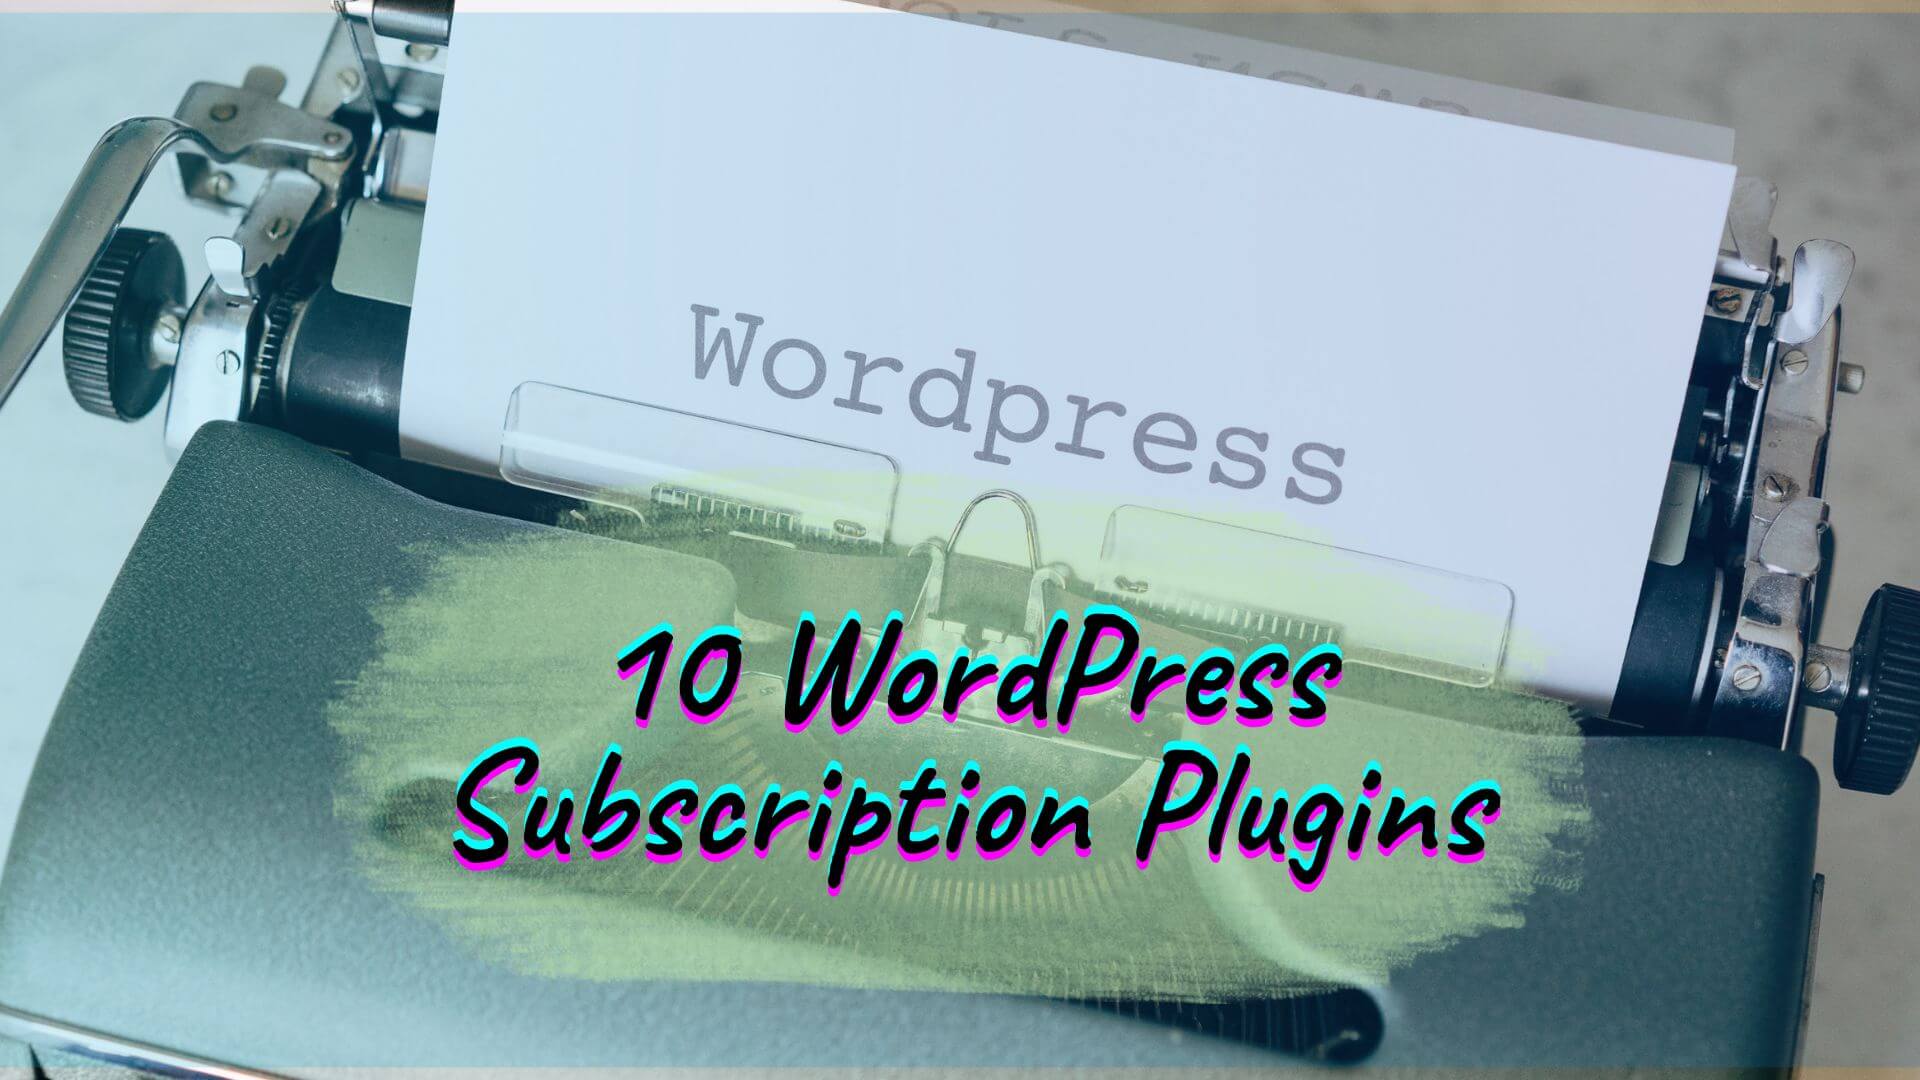 Do you want to transform your WordPress site into a subscription content powerhouse? Here are ten of the best WordPress subscription plugins.